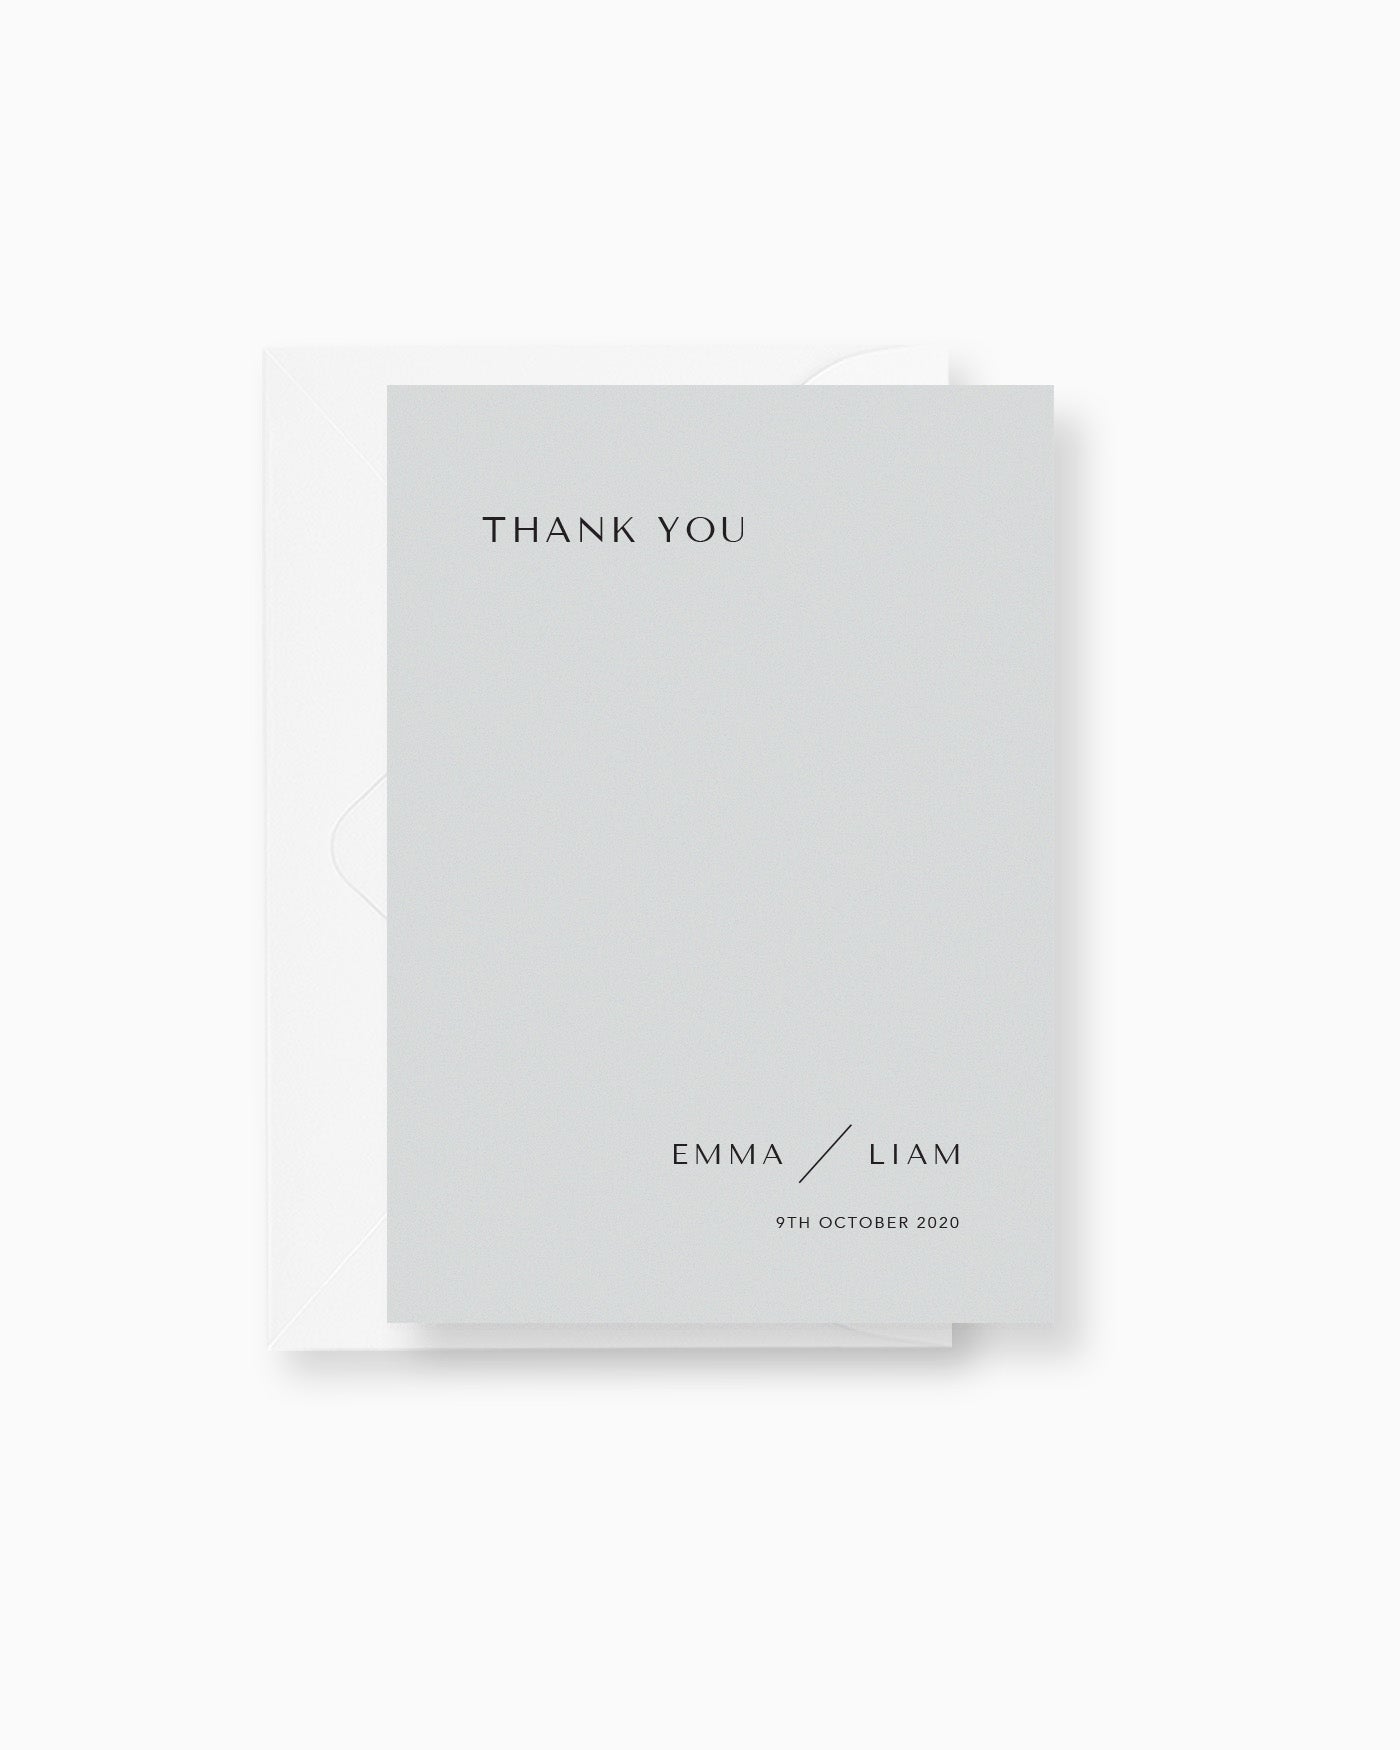 Peppermint Press Stationery Suite Melbourne Thank you Card